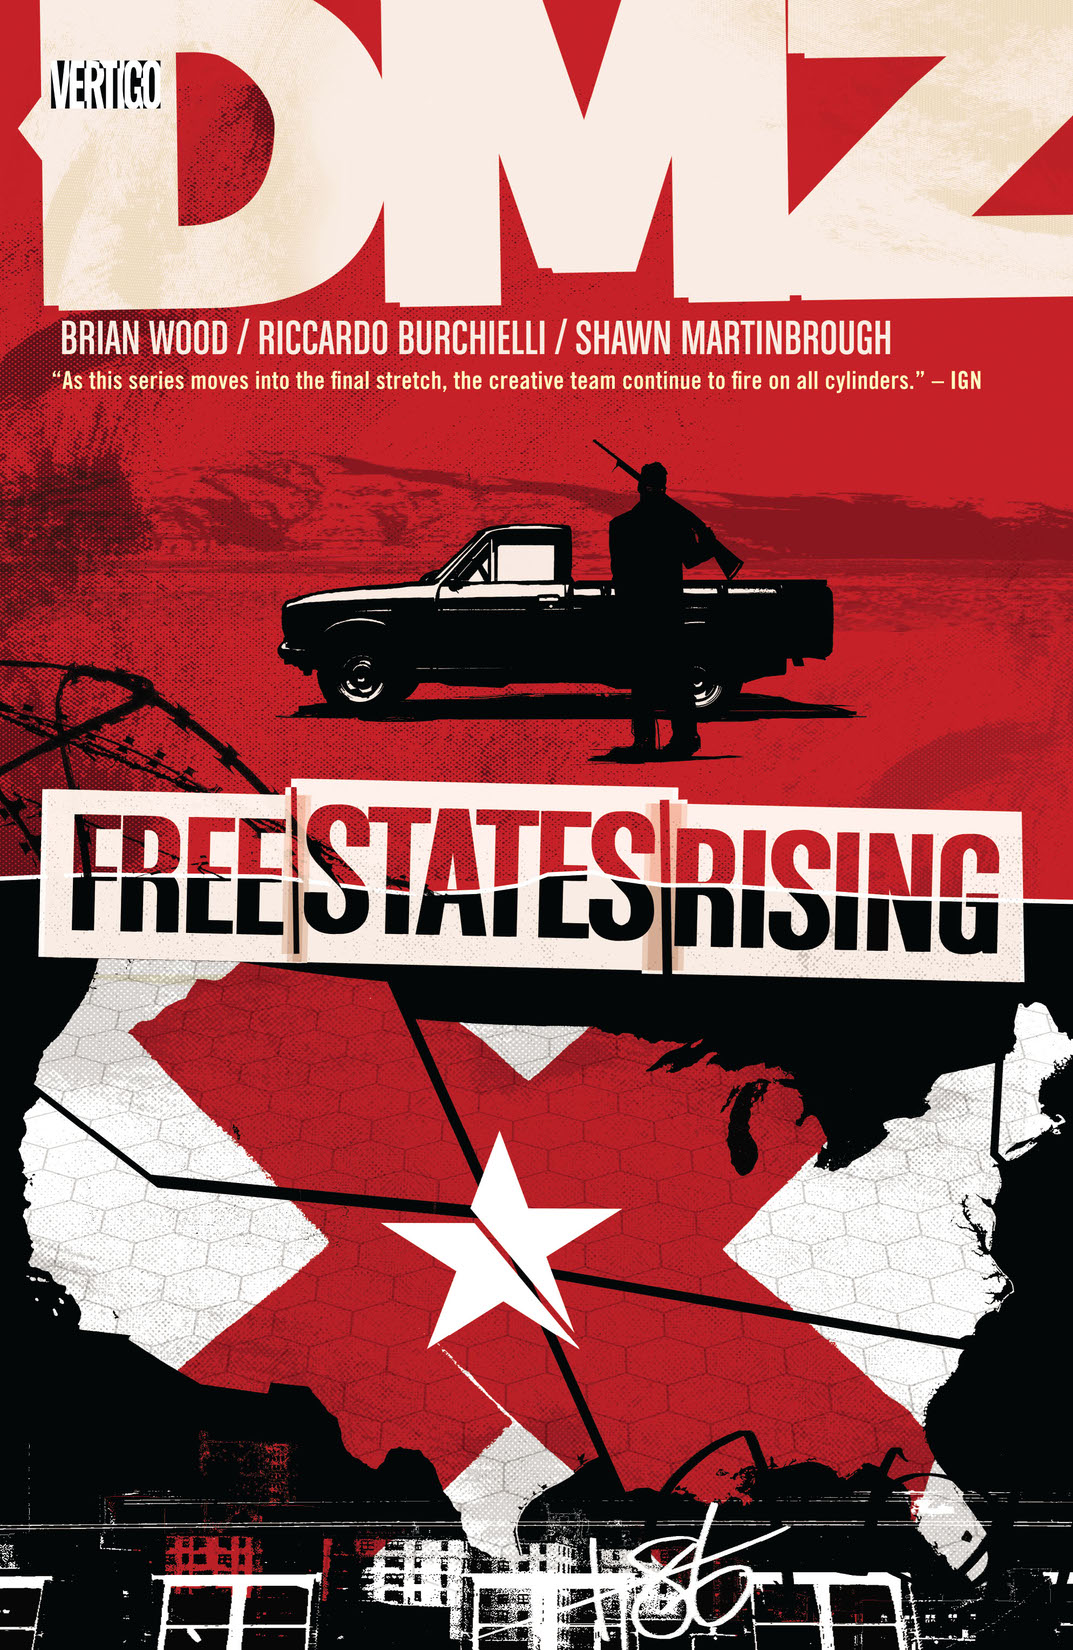 DMZ Vol. 11: Free States Rising preview images